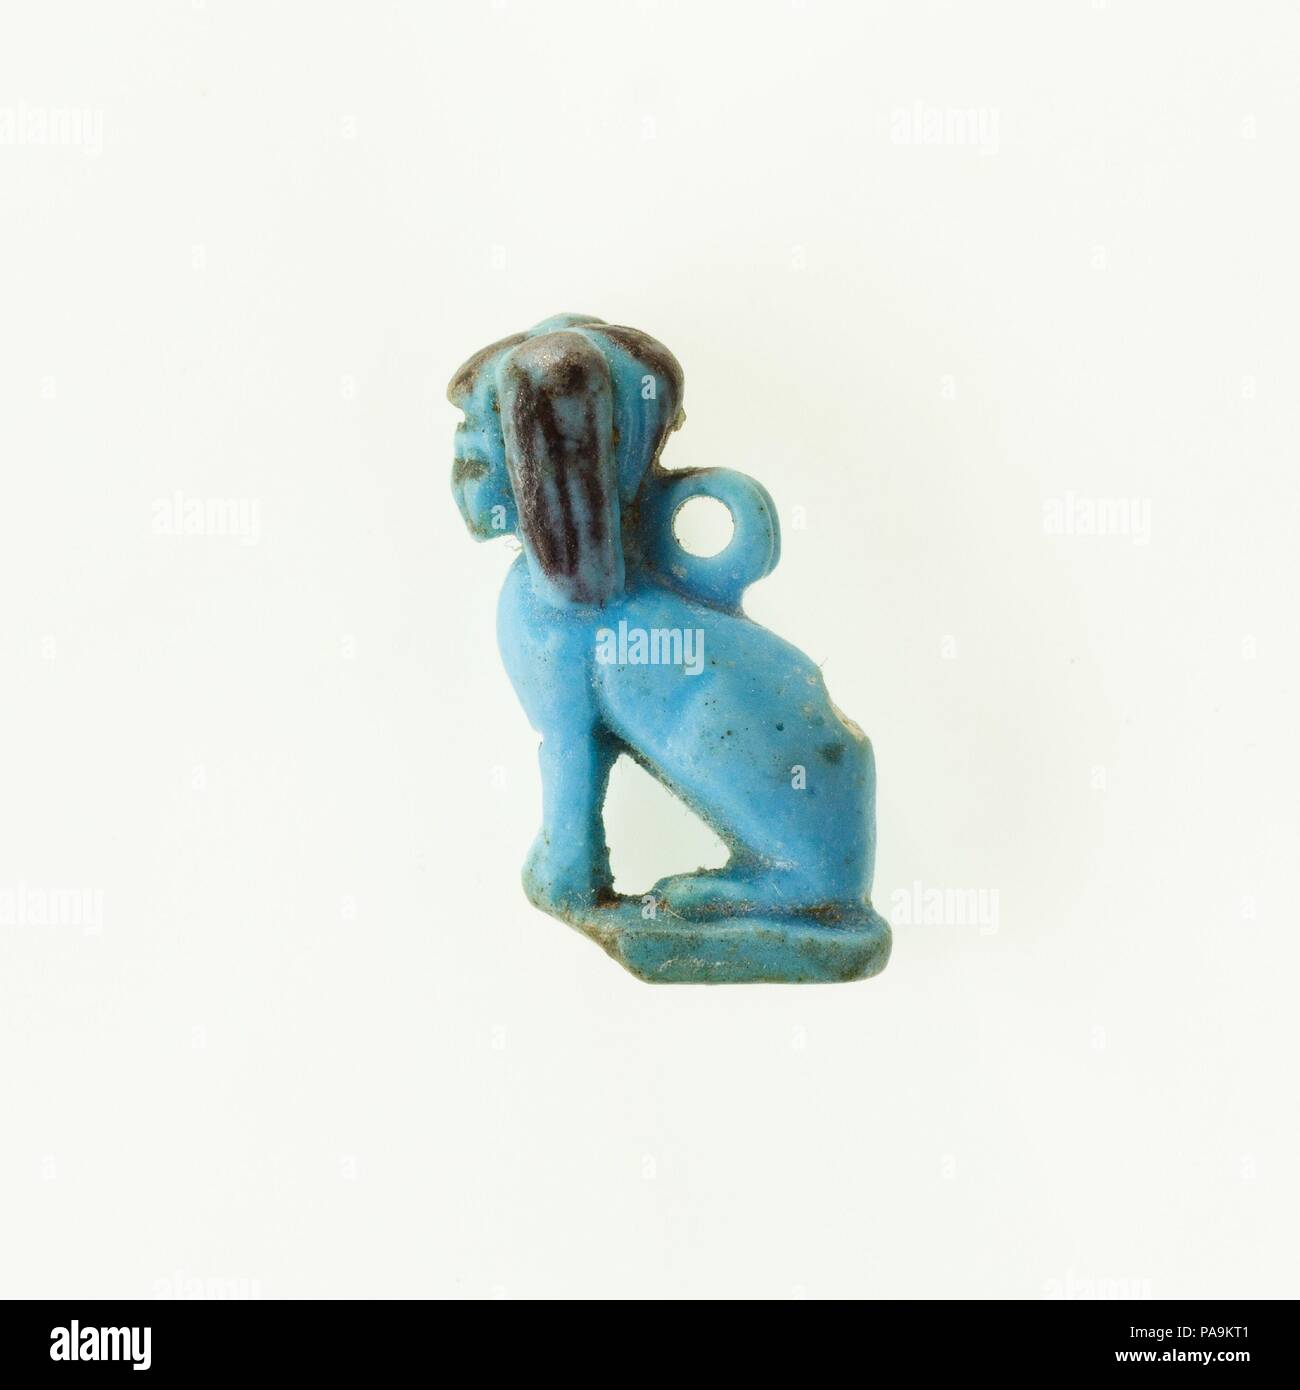 Sphinx Amulet. Dimensions: H. 1.4 cm (9/16 in). Dynasty: Dynasty 26-29. Date: 664-332 B.C.. Museum: Metropolitan Museum of Art, New York, USA. Stock Photo